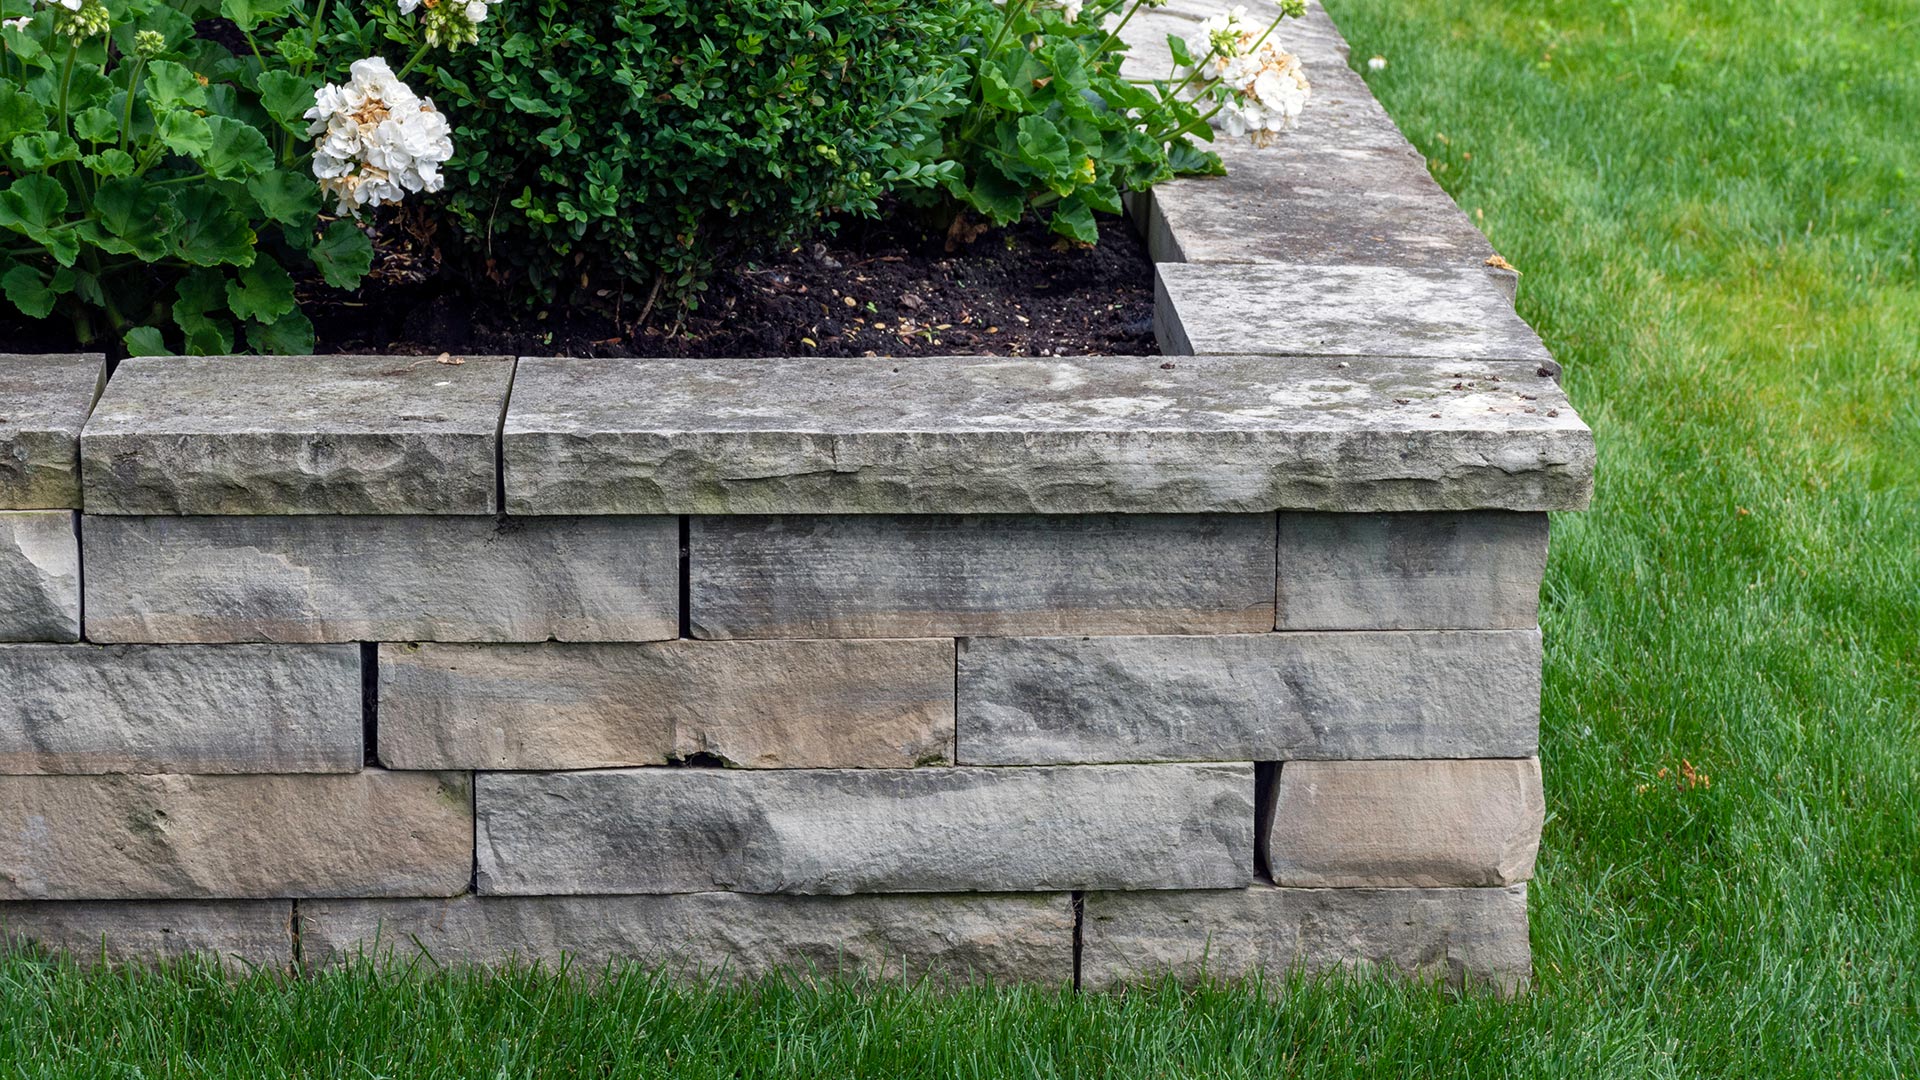 The corner of a stone retaining wall in Chester county, PA.